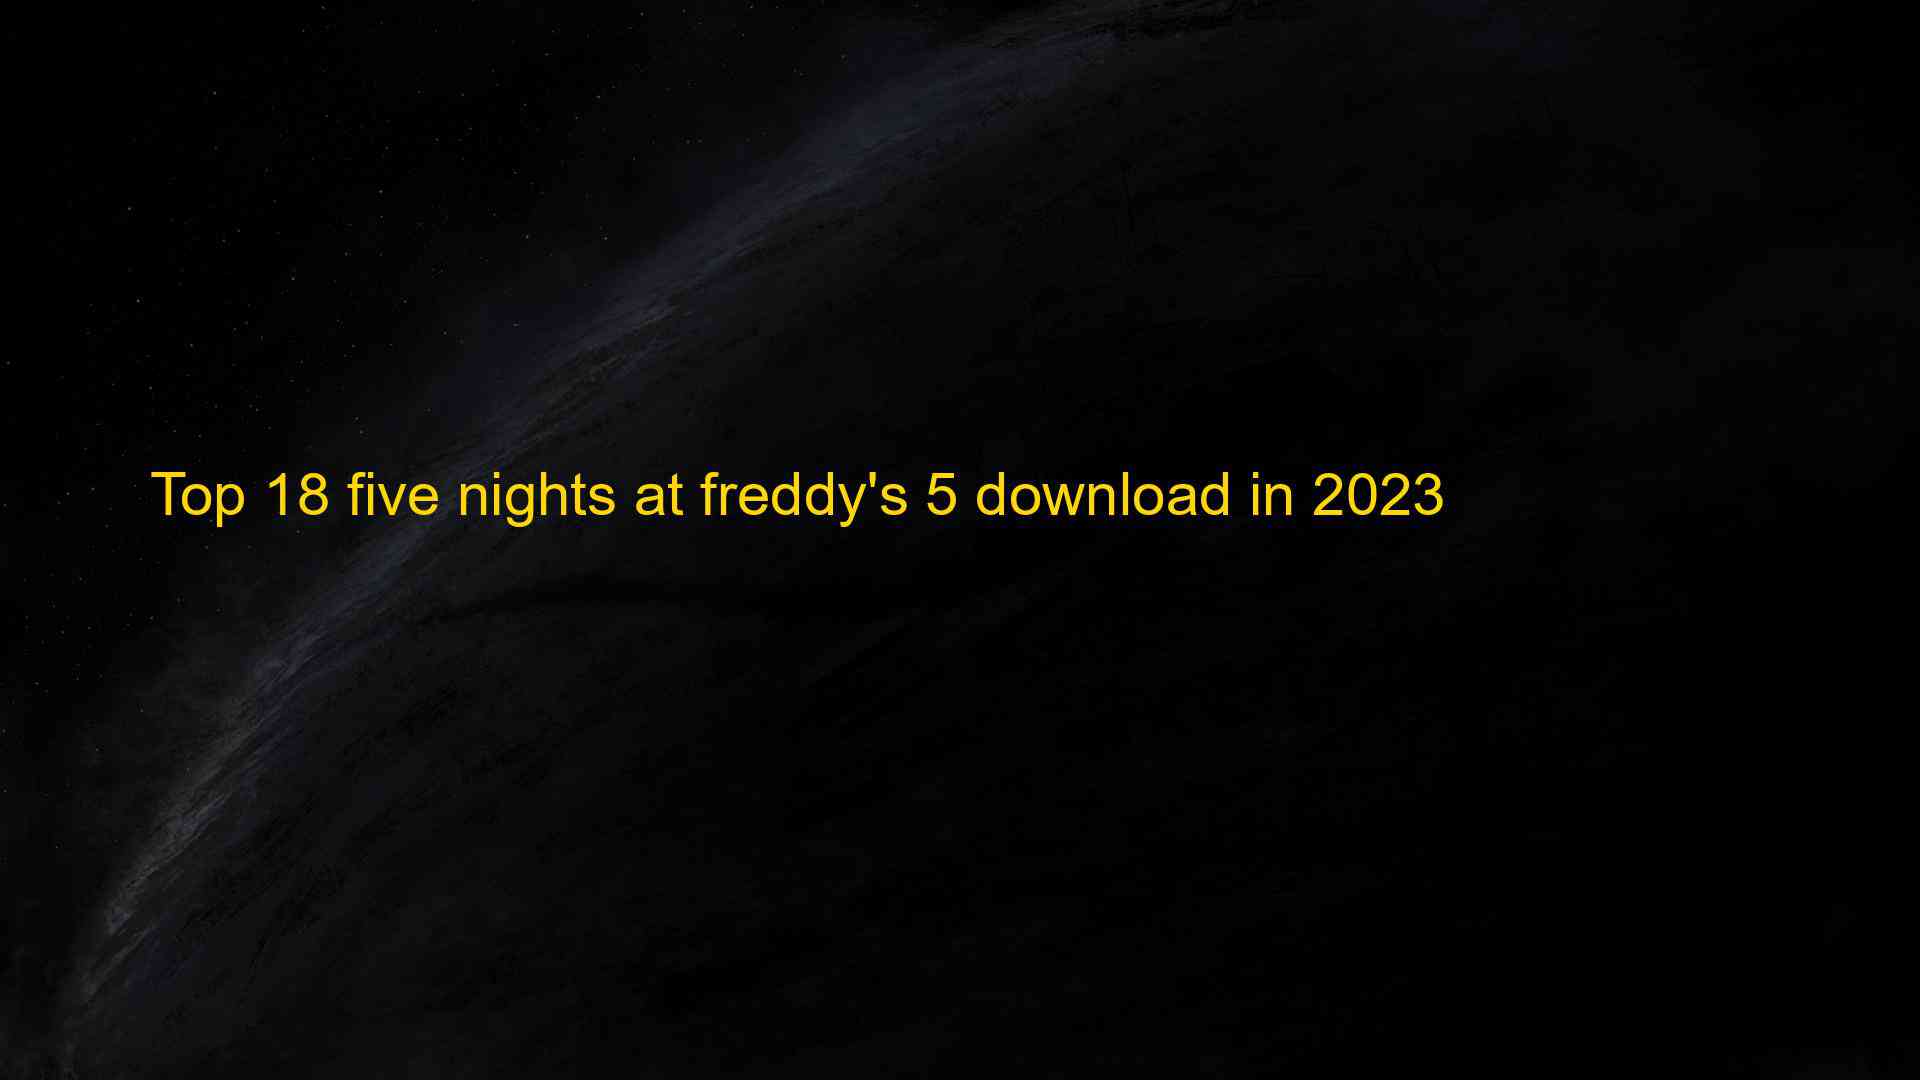 Top 18 Five Nights At Freddys 5 Download In 2023 1685045173 